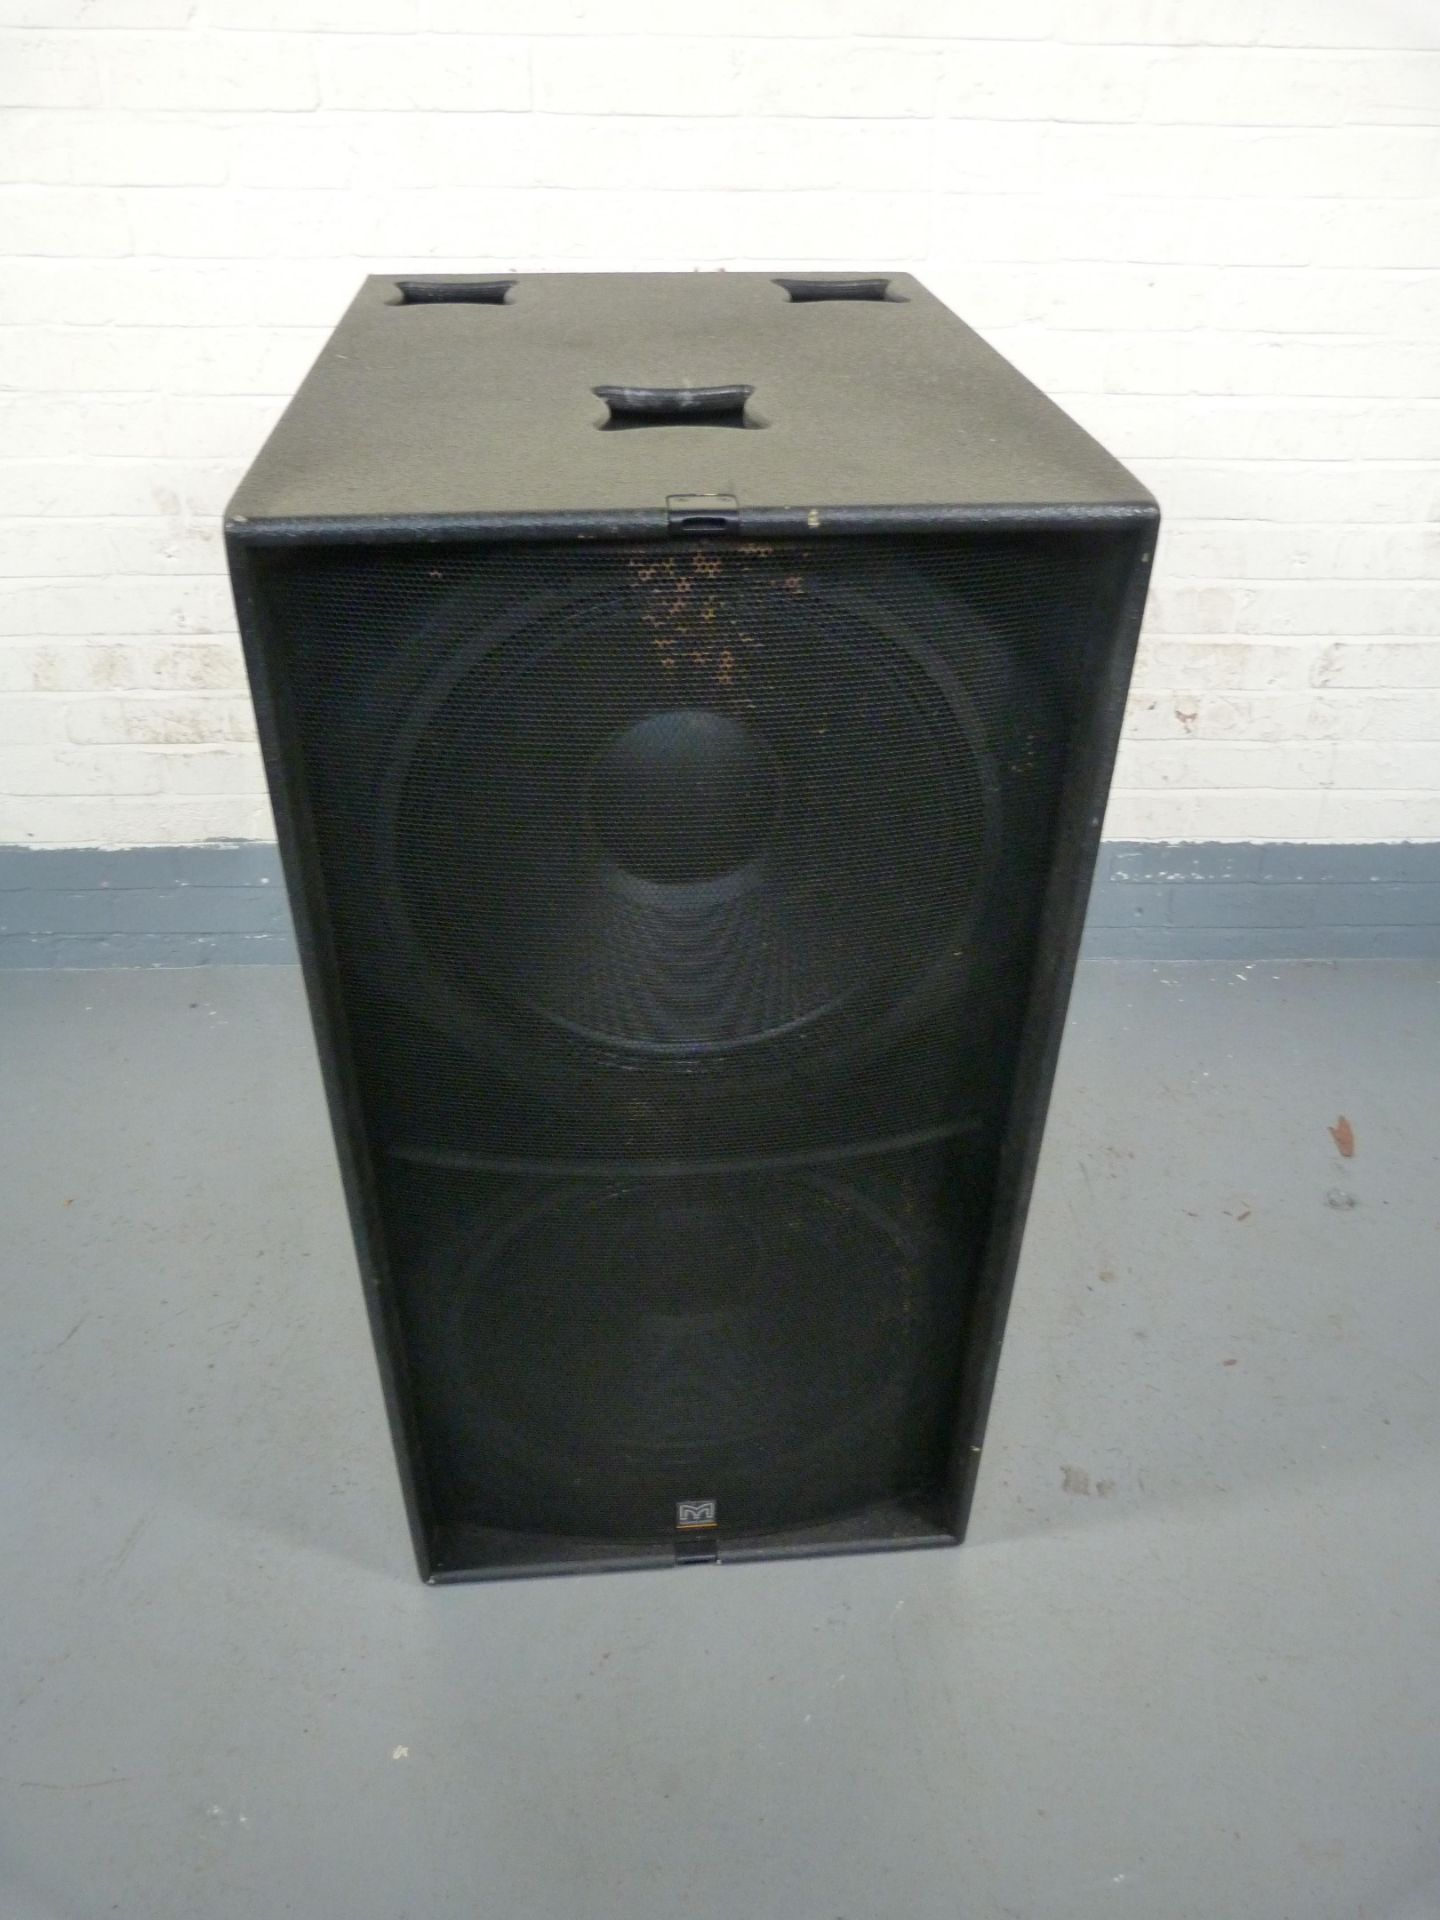 Martin Audio WS218X Sub With Soft Cover. Photo representative. Included within Lot 10. If sum of